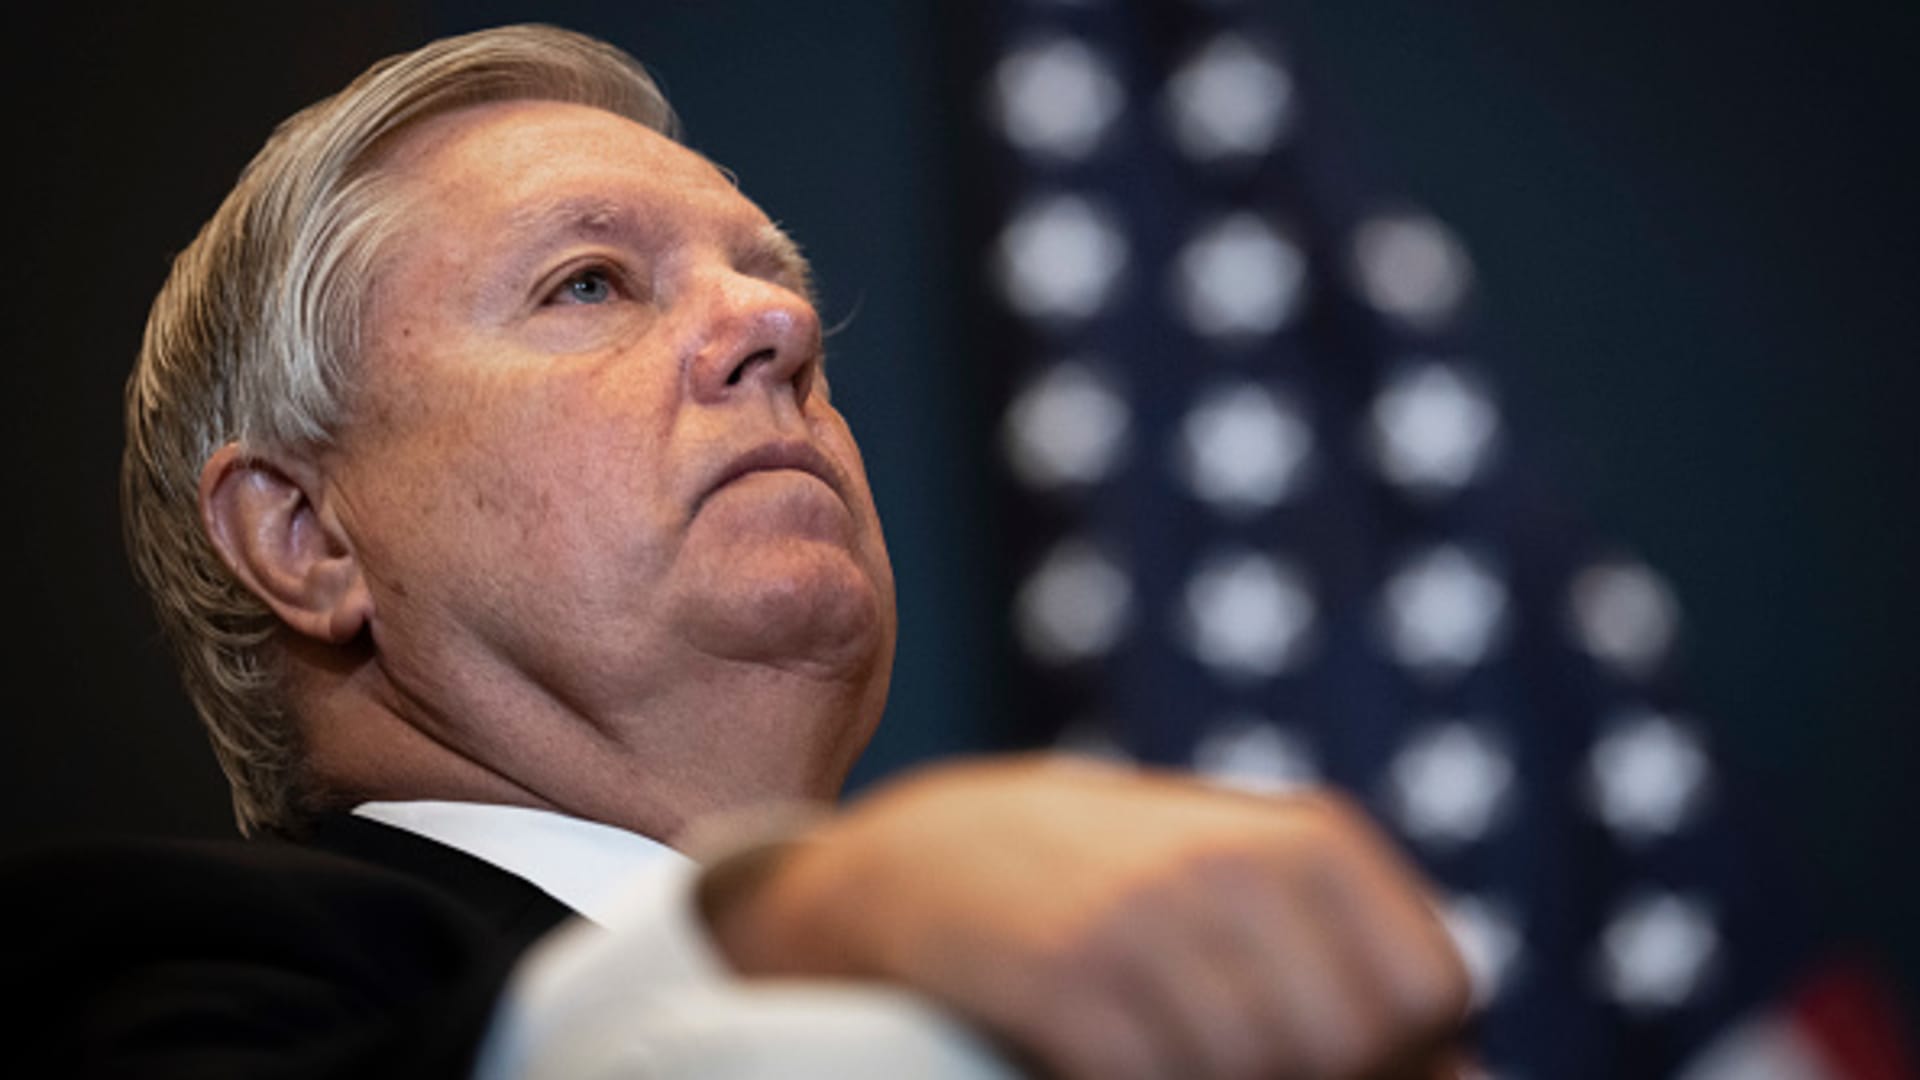 Sen. Lindsey Graham participates in a panel discussion on the economy during the America First Agenda Summit, at the Marriott Marquis hotel on July 26, 2022 in Washington, DC.